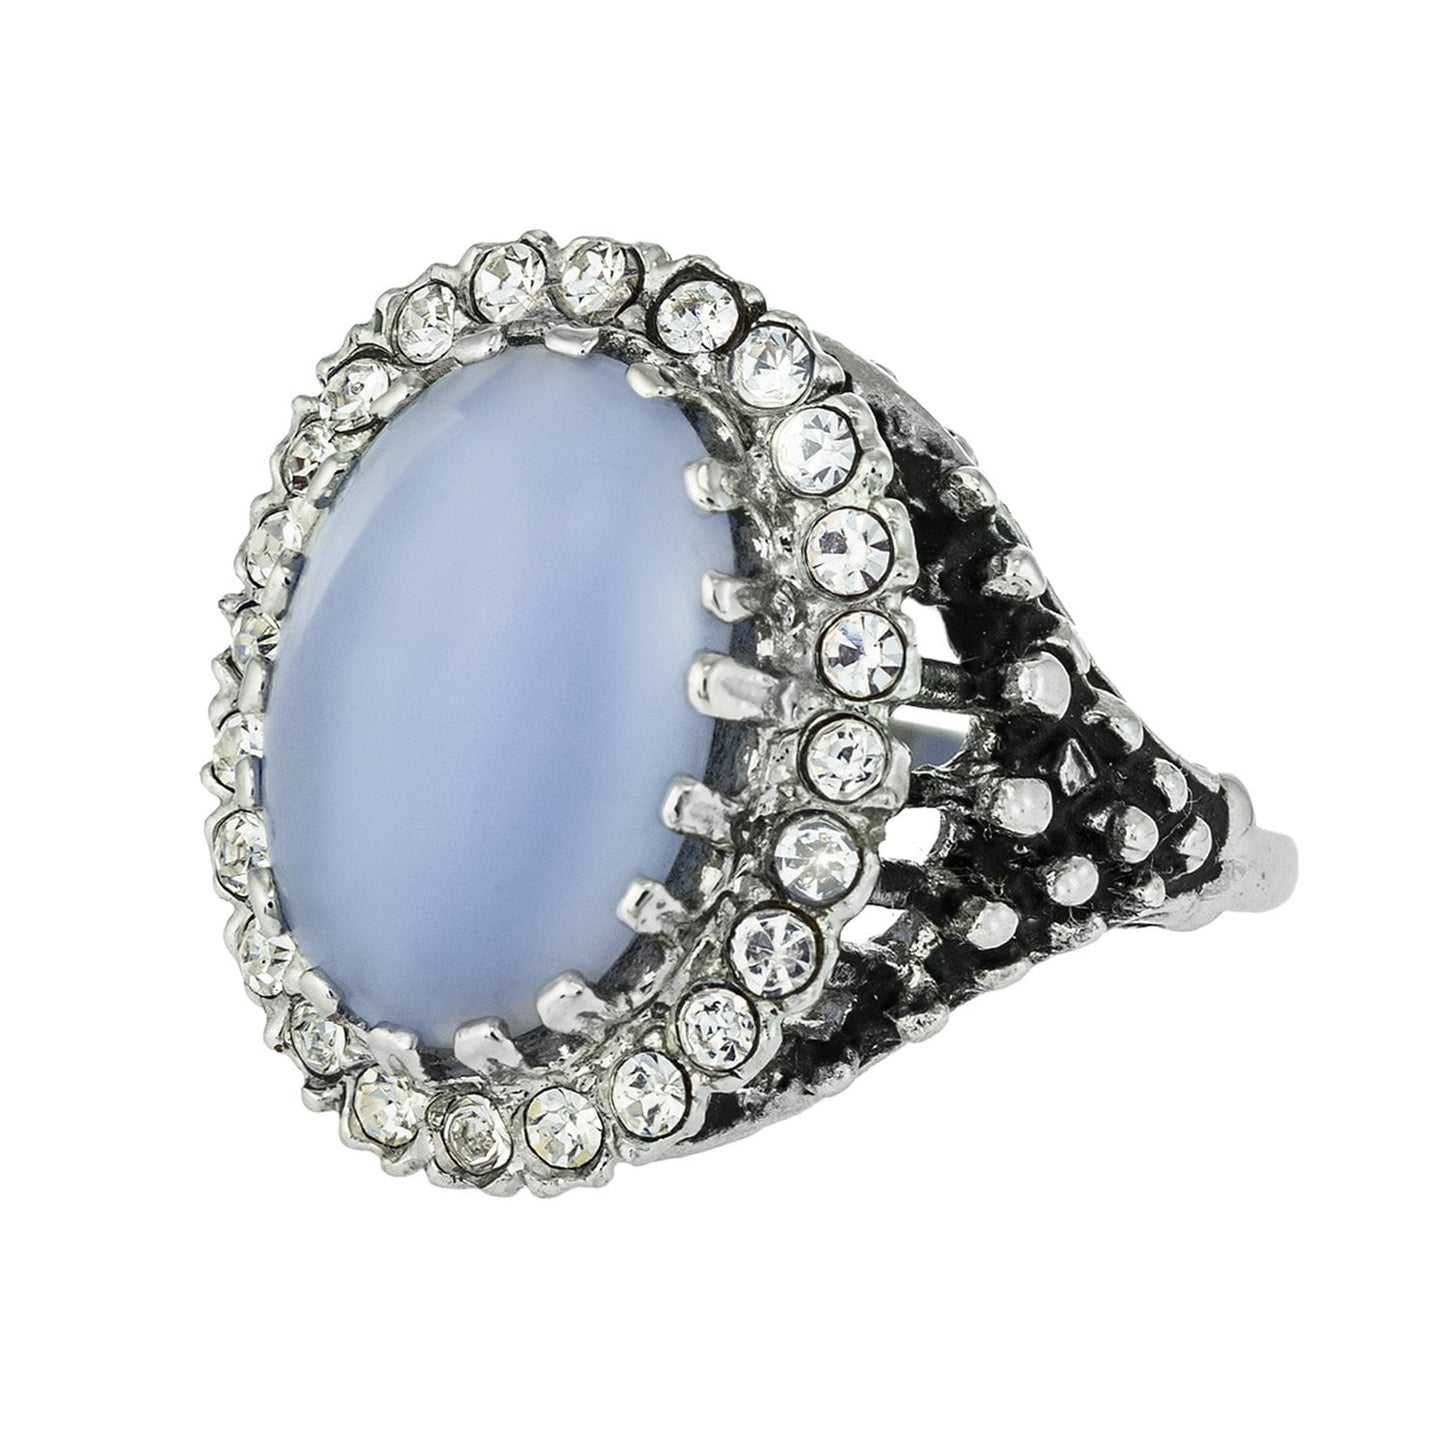 Genuine Blue Vintage Ring Moonstone Edwardian Style Antique 18k White Gold Clear Crystals Womans Jewelry R169 - Limited Stock - Never Worn